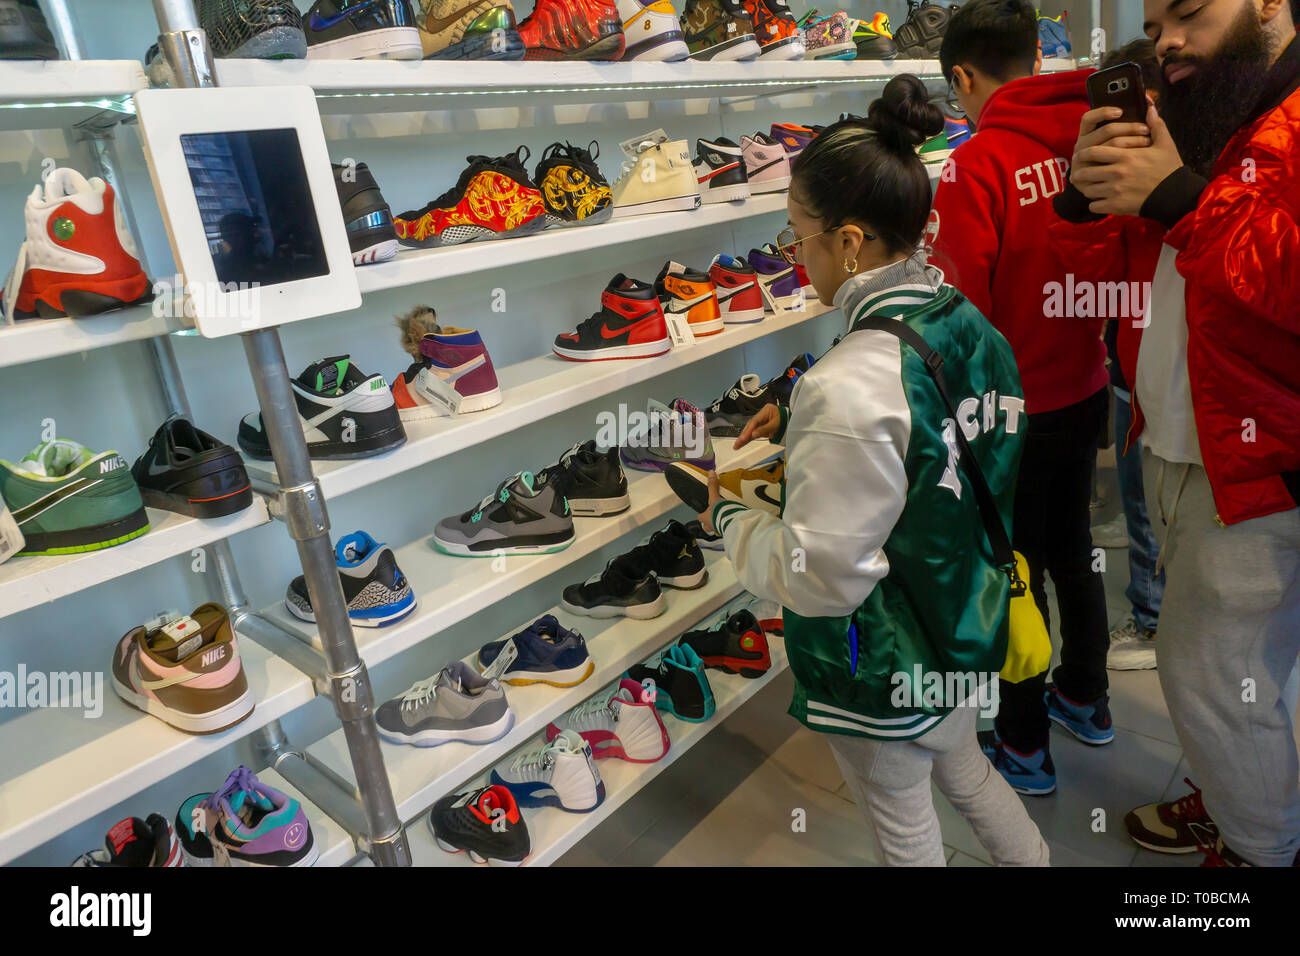 10 Best Sneaker & Shoe Stores in NYC for Sneakerheads